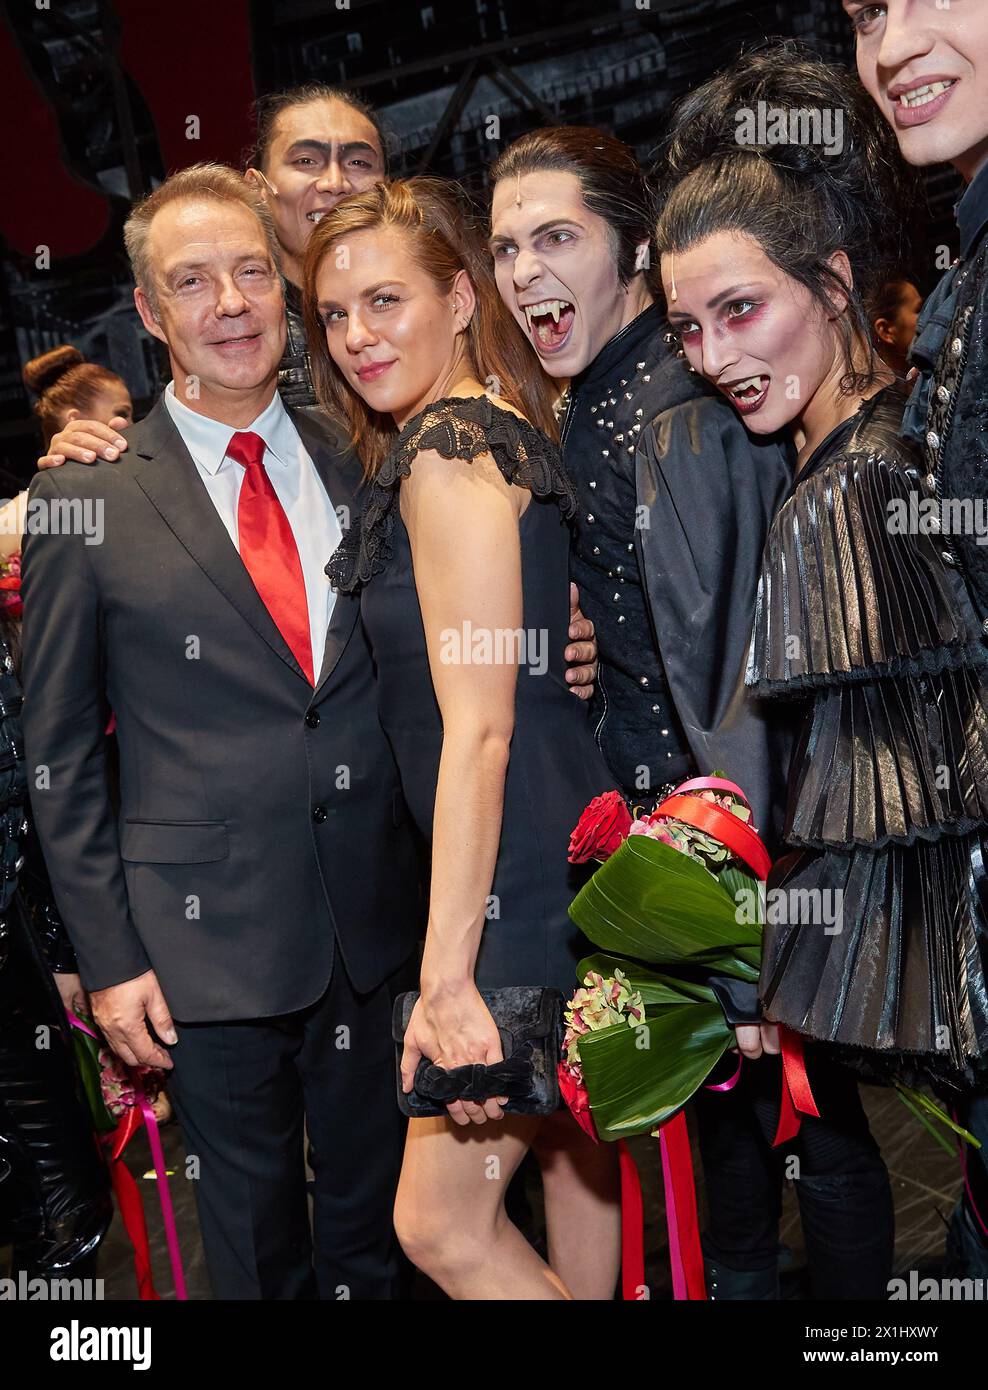 Cornelius BALTUS (director, L) Morgane POLANSKI (2 nd from L) during 20 years of musical ' Dance of the Vampires ' (Tanz der Vampire) gala premiere at Ronacher in Vienna, Austria, on 30 th September 2017. - 20170930 PD15153 - Rechteinfo: Rights Managed (RM) Stock Photo